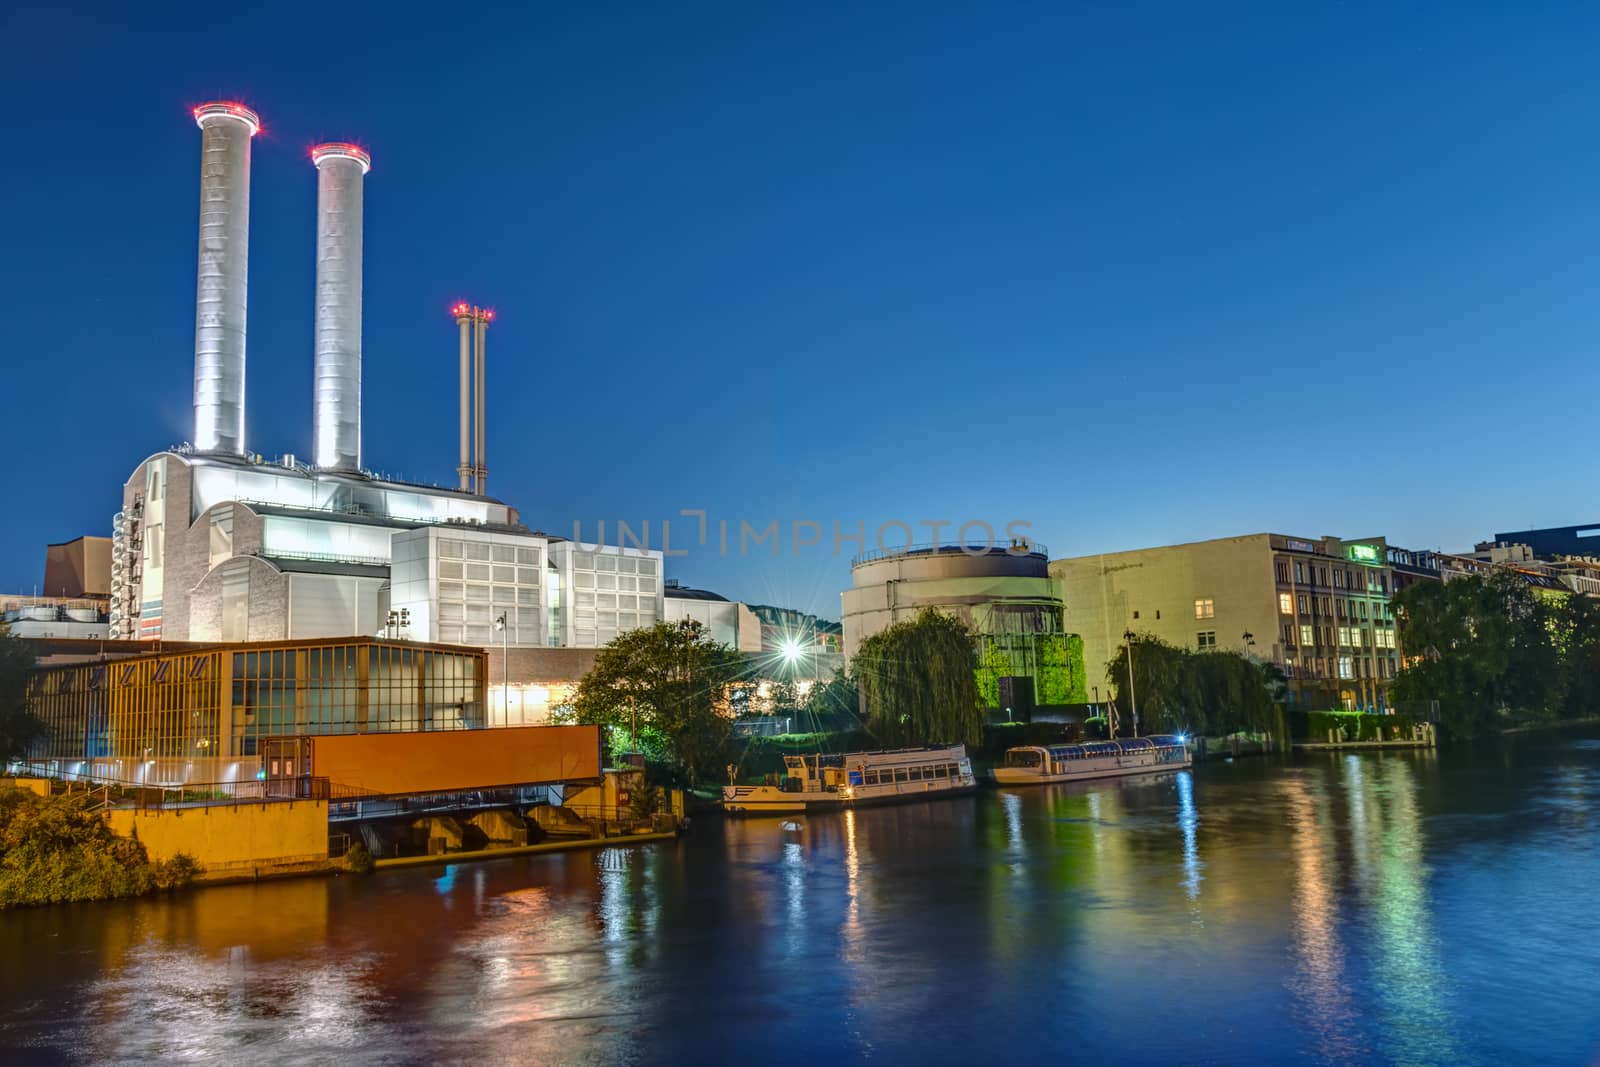 Cogeneration plant at the river Spree in Berlin by elxeneize